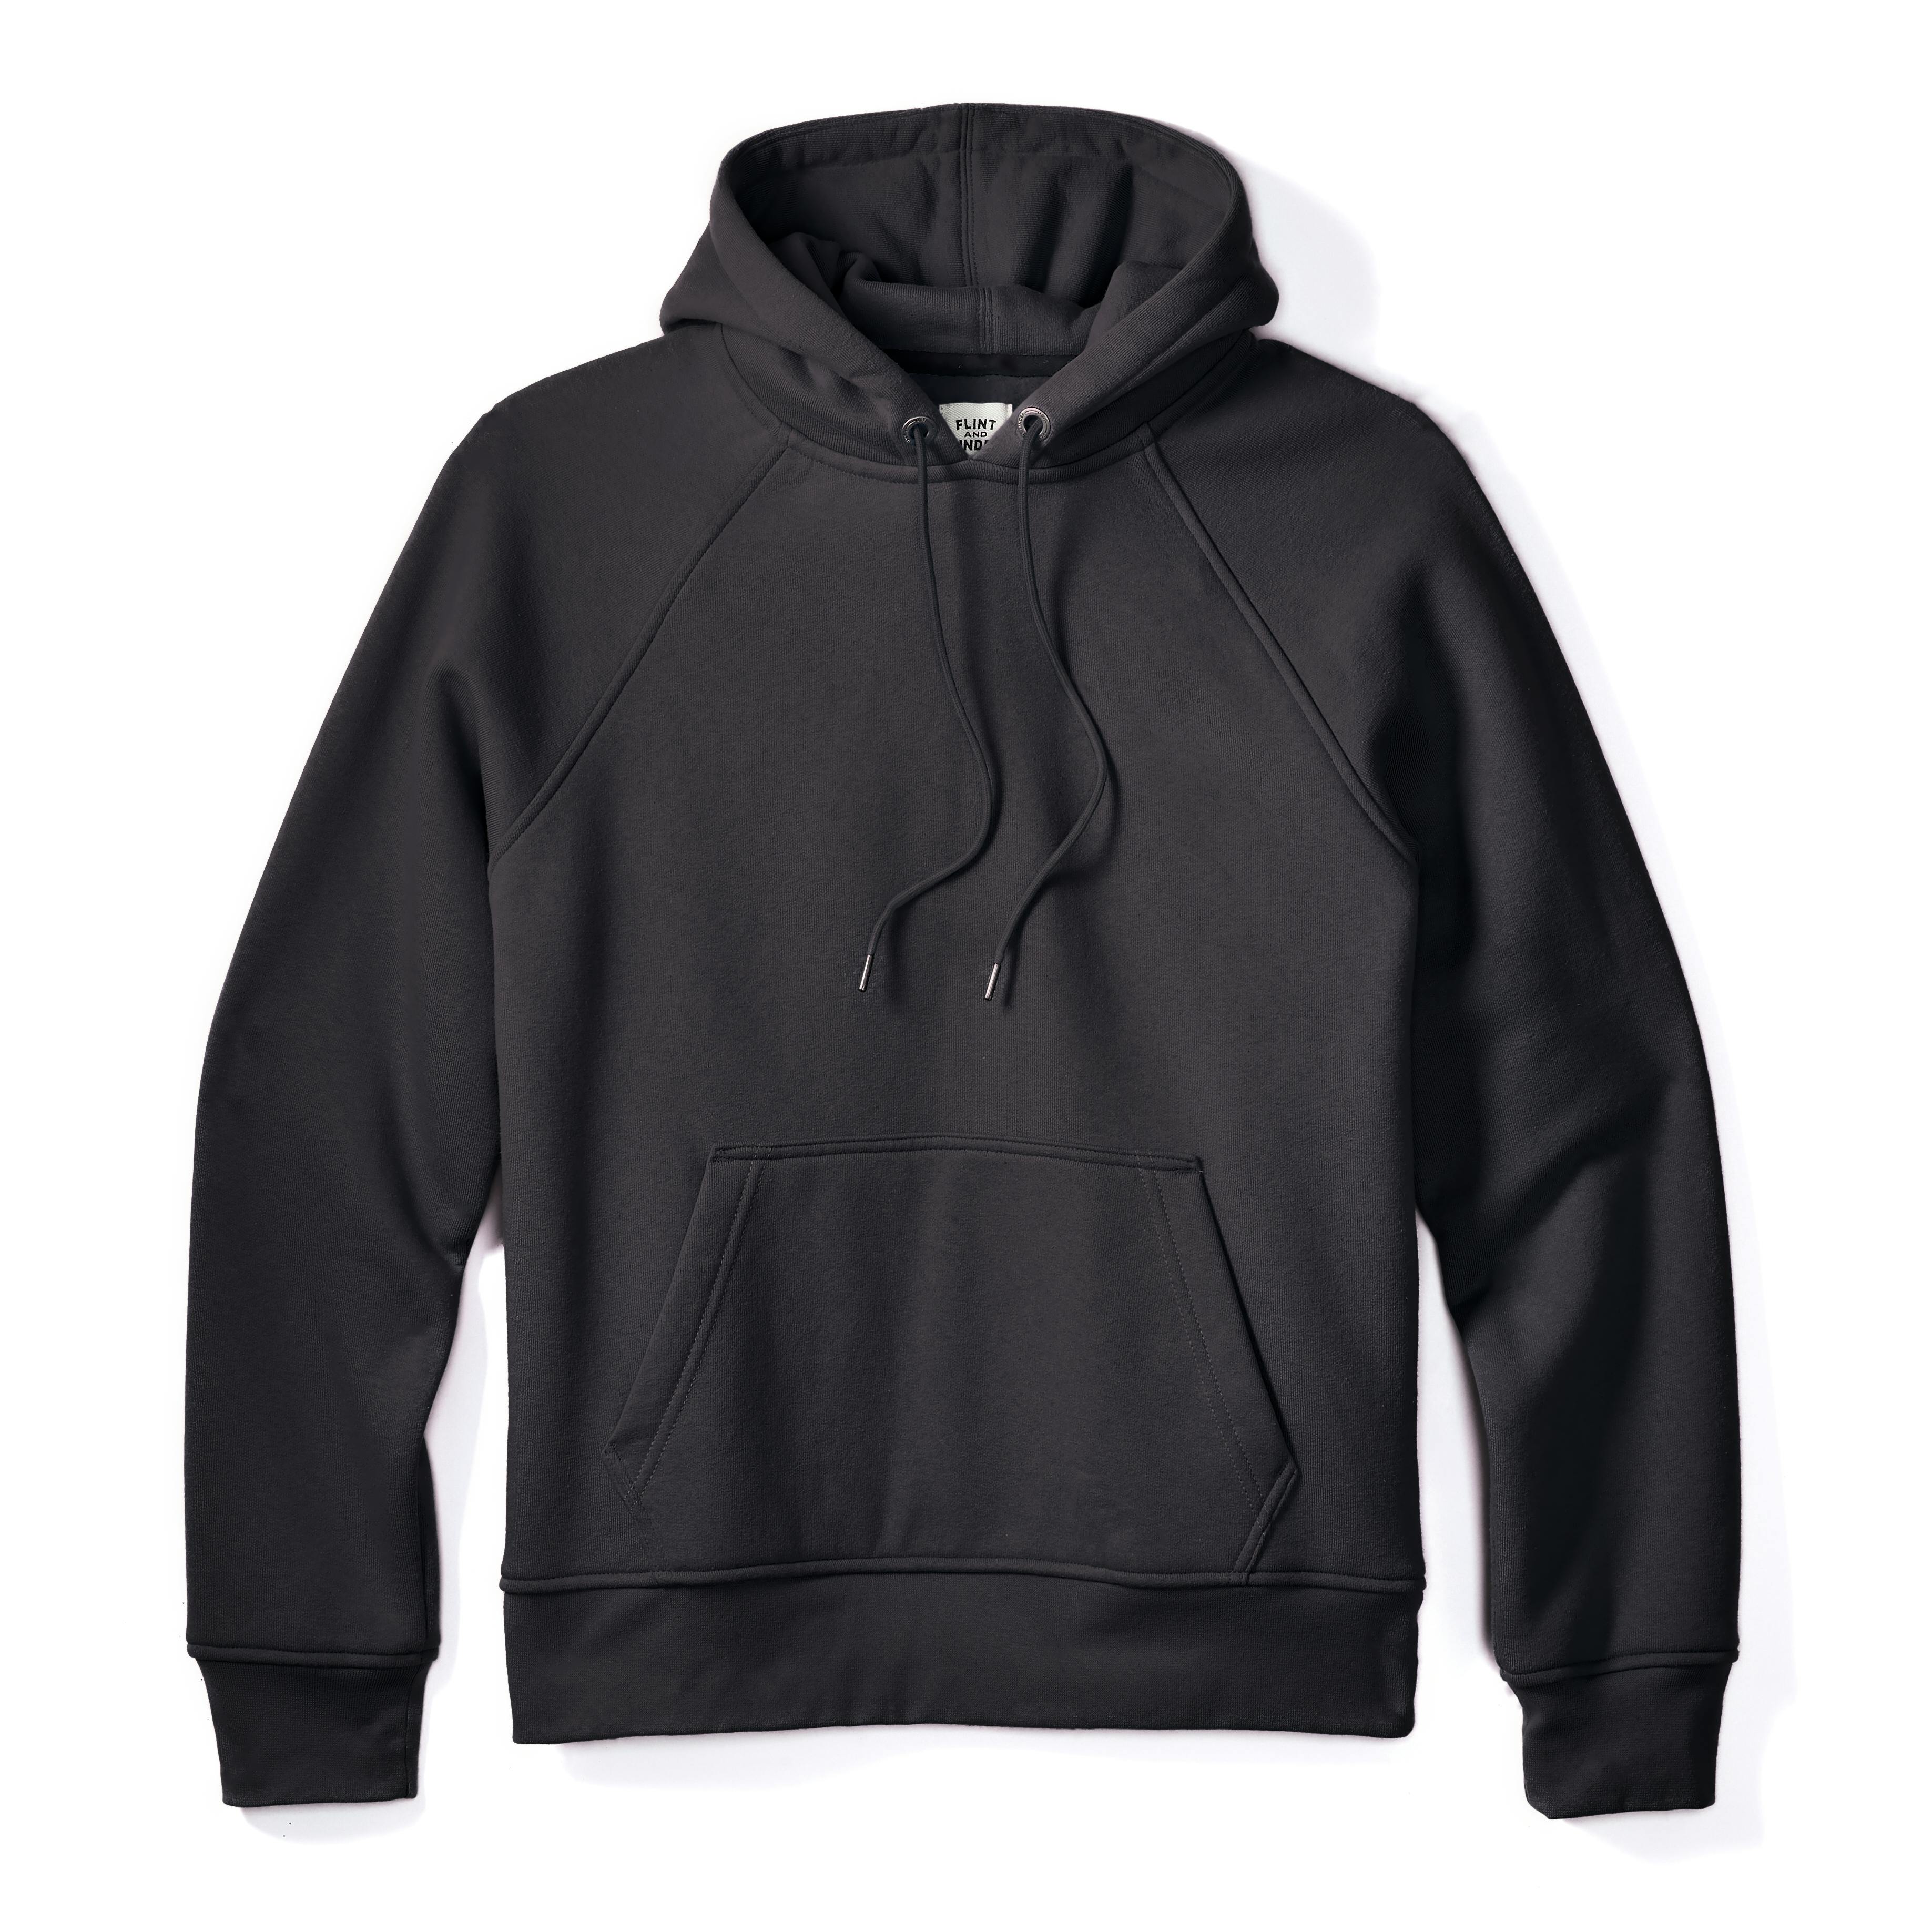 Types of material for a hoodie - Choose the right material